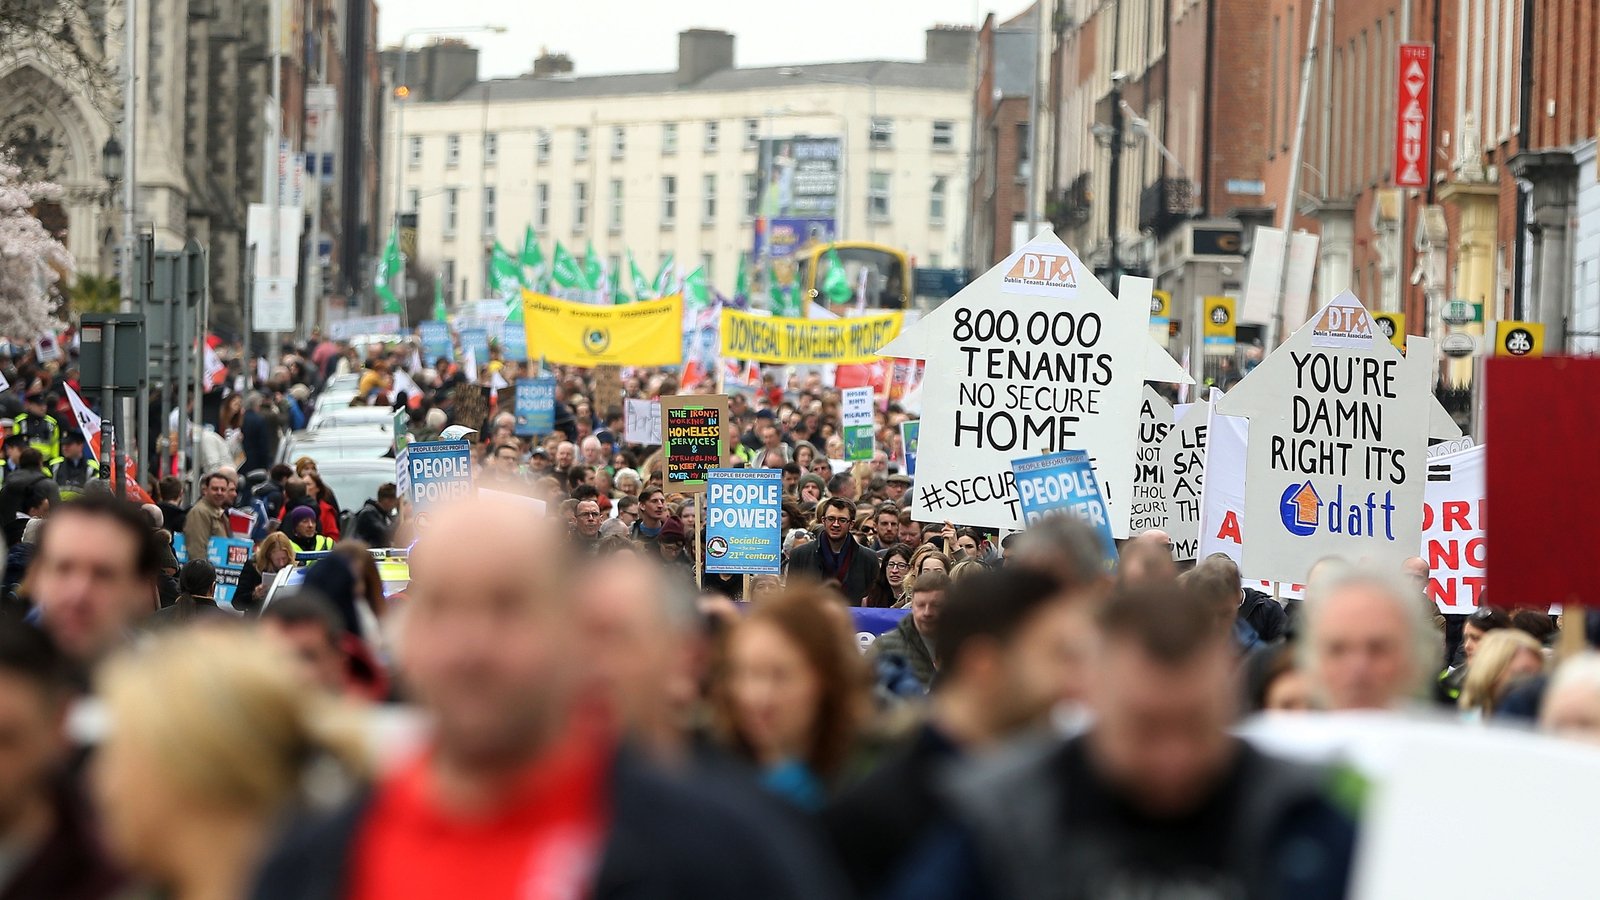 Protest on housing crisis to take place next month